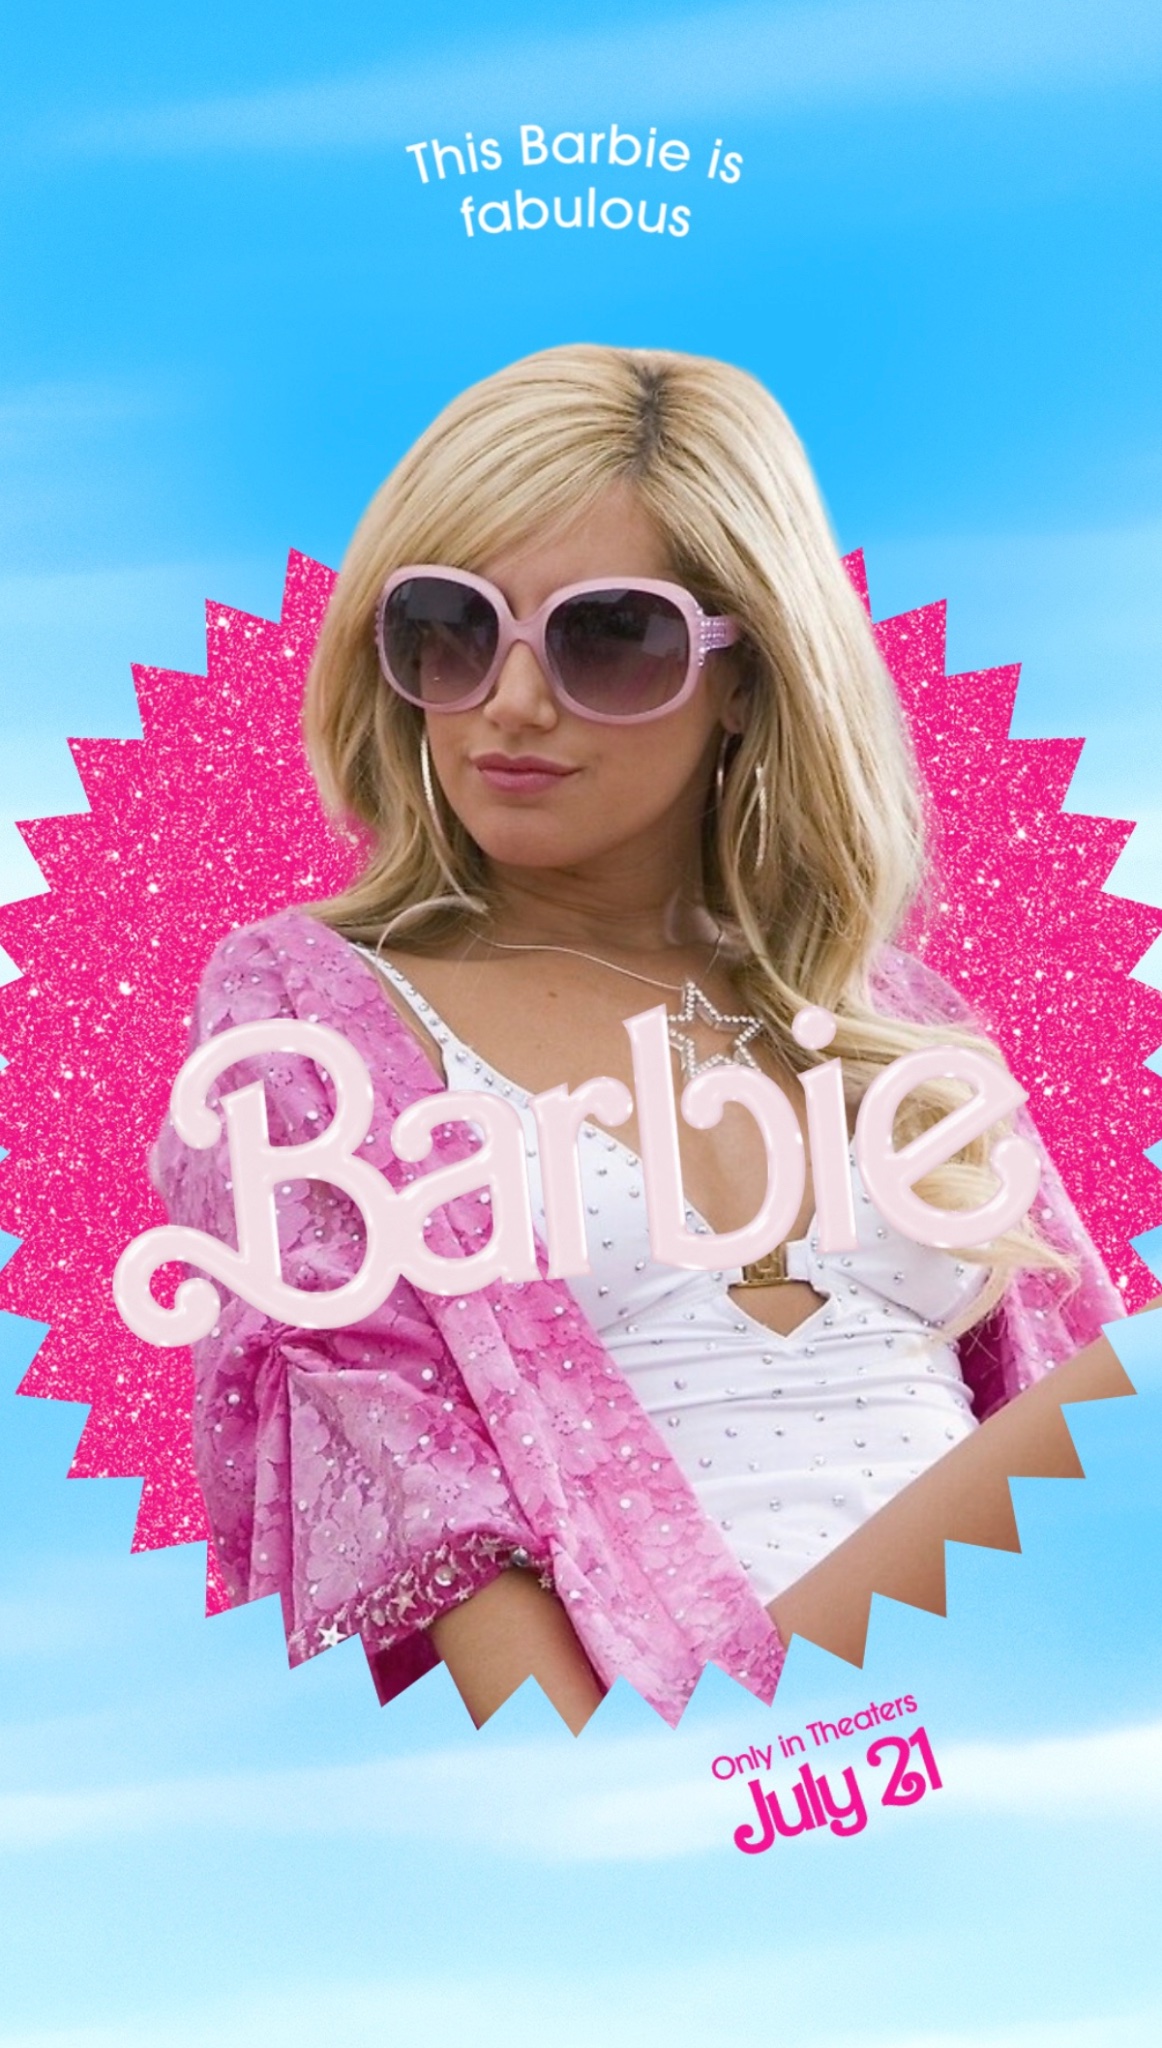 high school musical sharpay - This Barbie is fabulous Barbie Only in Theaters July 21